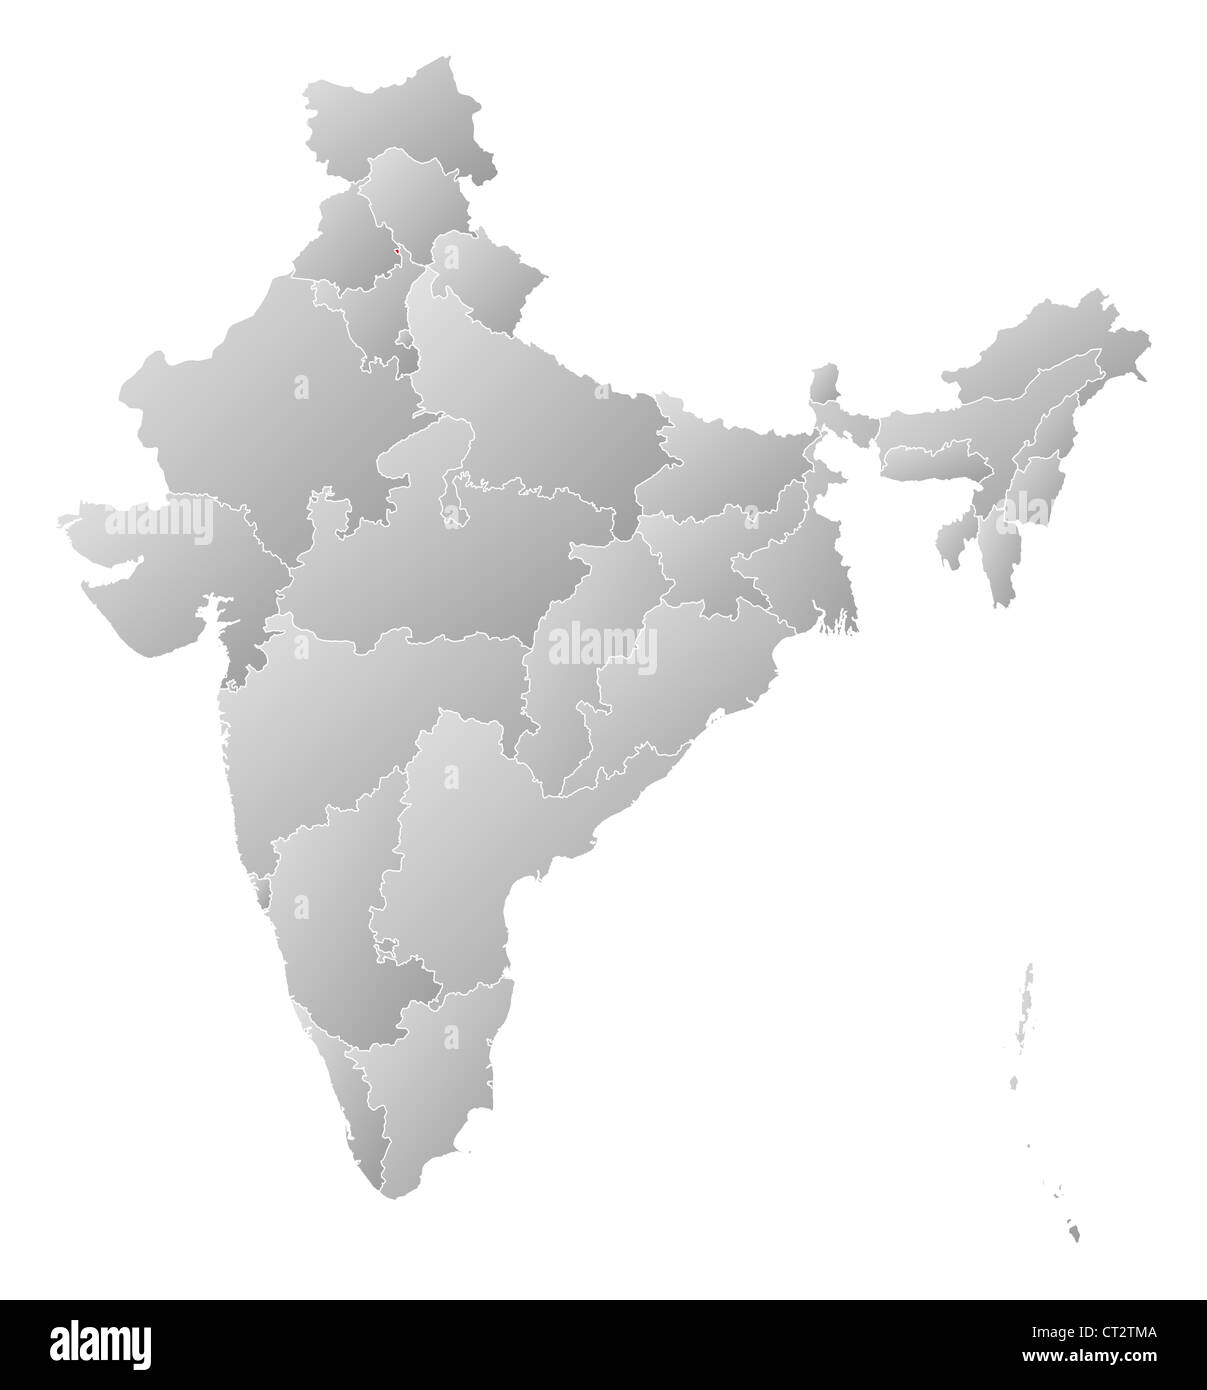 Political map of India with the several states where Chandigarh is highlighted. Stock Photo